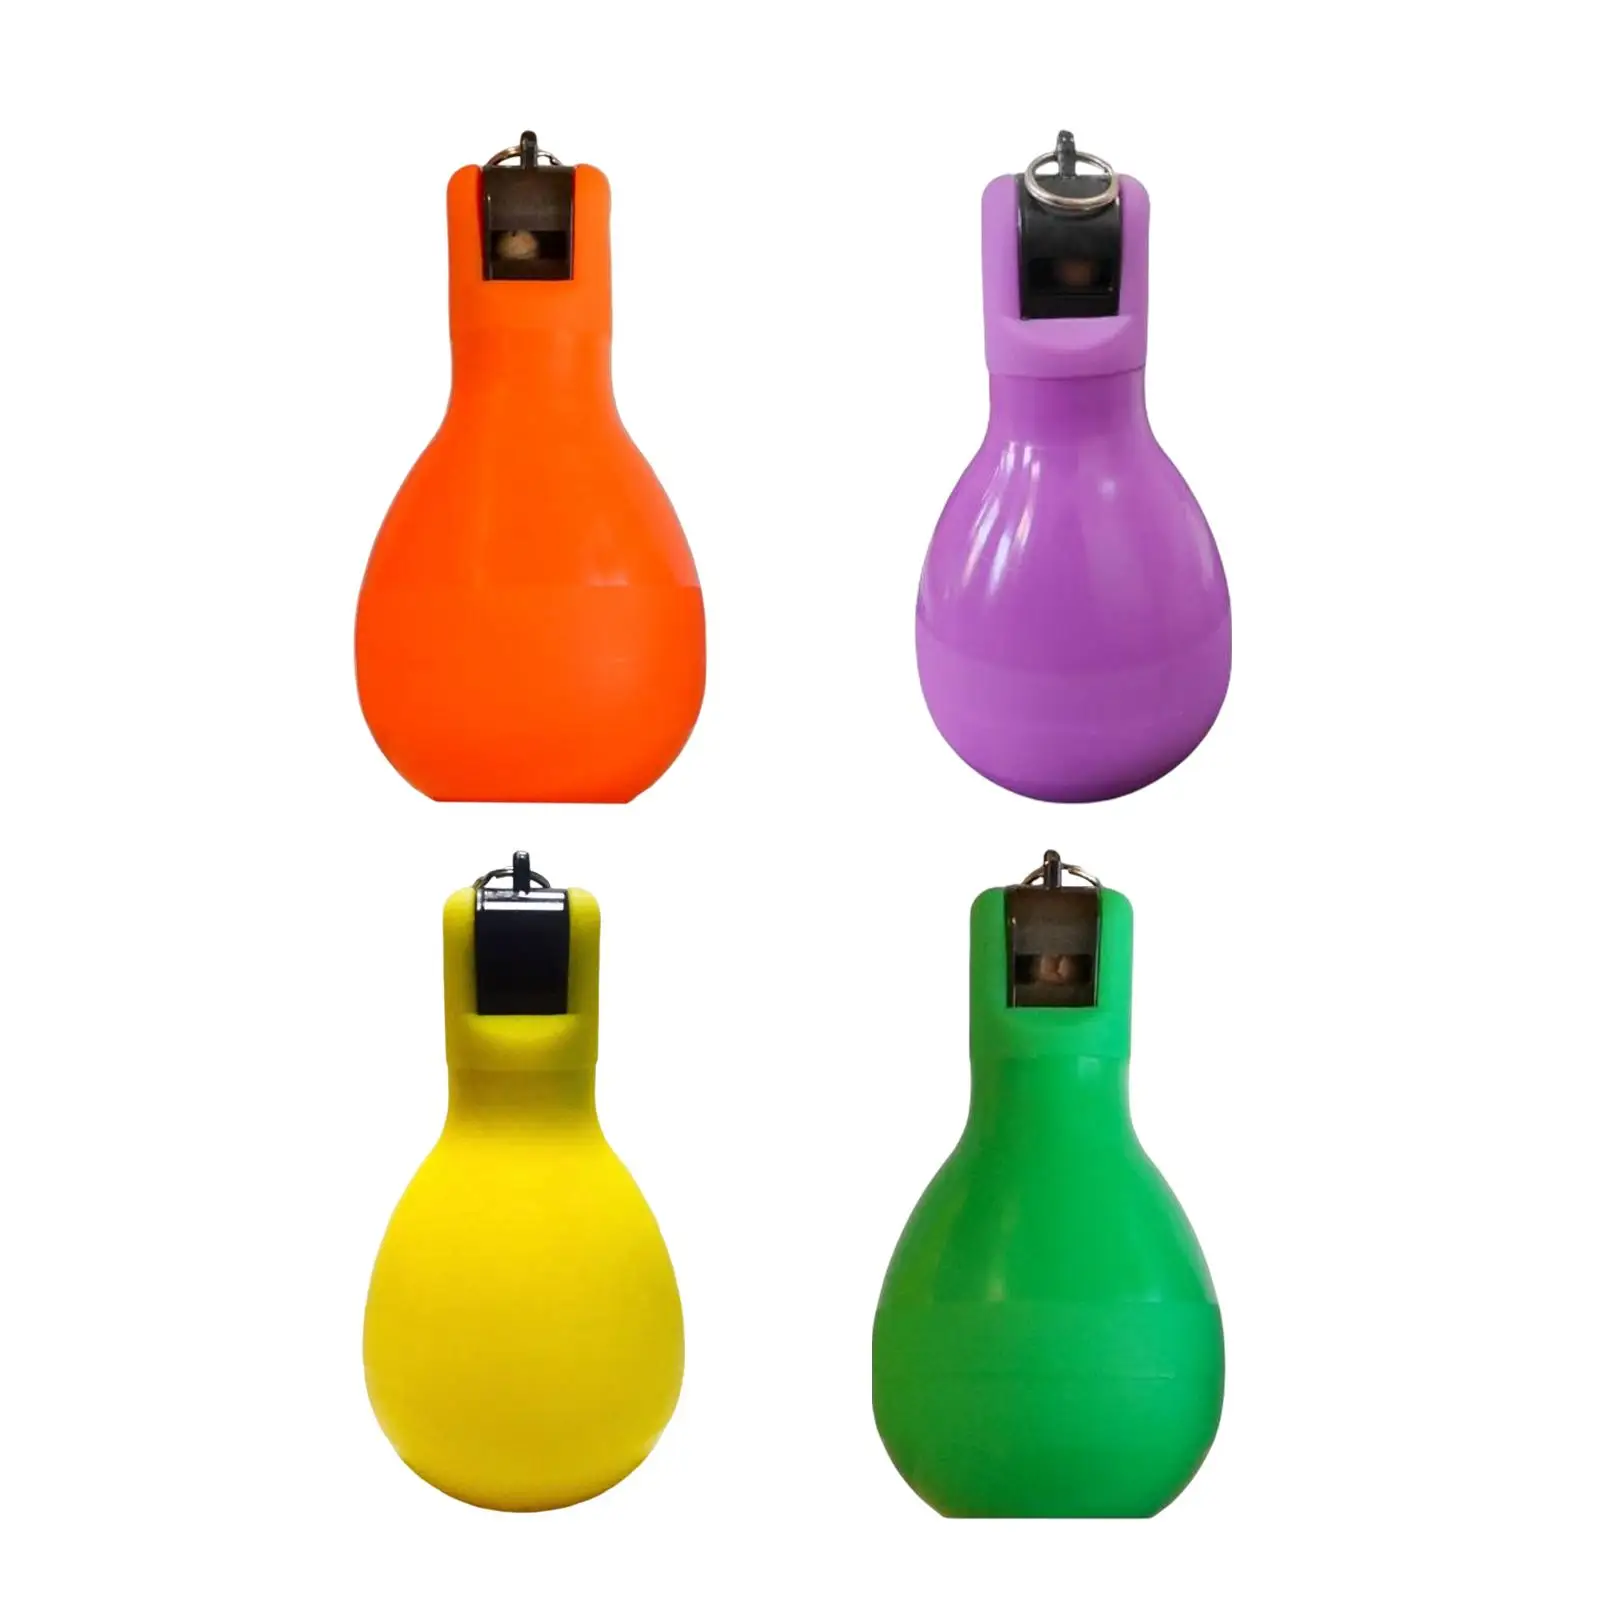 Outdoor Sports Whistle Portable Professional Handheld Hand Whistles for Teachers Emergency Basketball